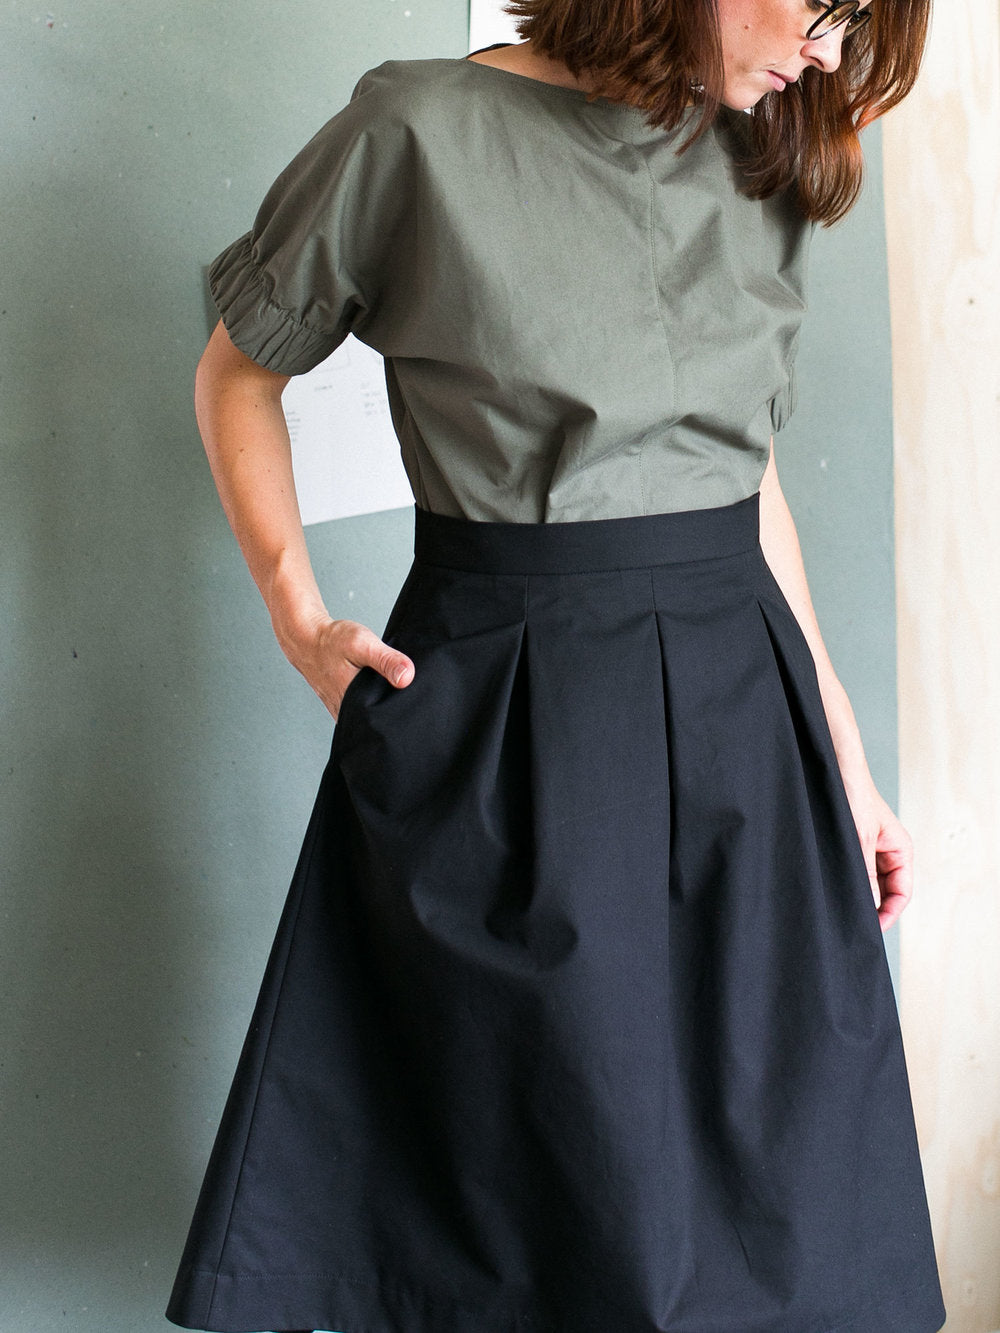 Woman wearing the Three Pleat Skirt sewing pattern by The Assembly Line. A pleated skirt pattern made in denim, cotton twill or canvas fabric featuring a right side pocket, and left side zipper opening.